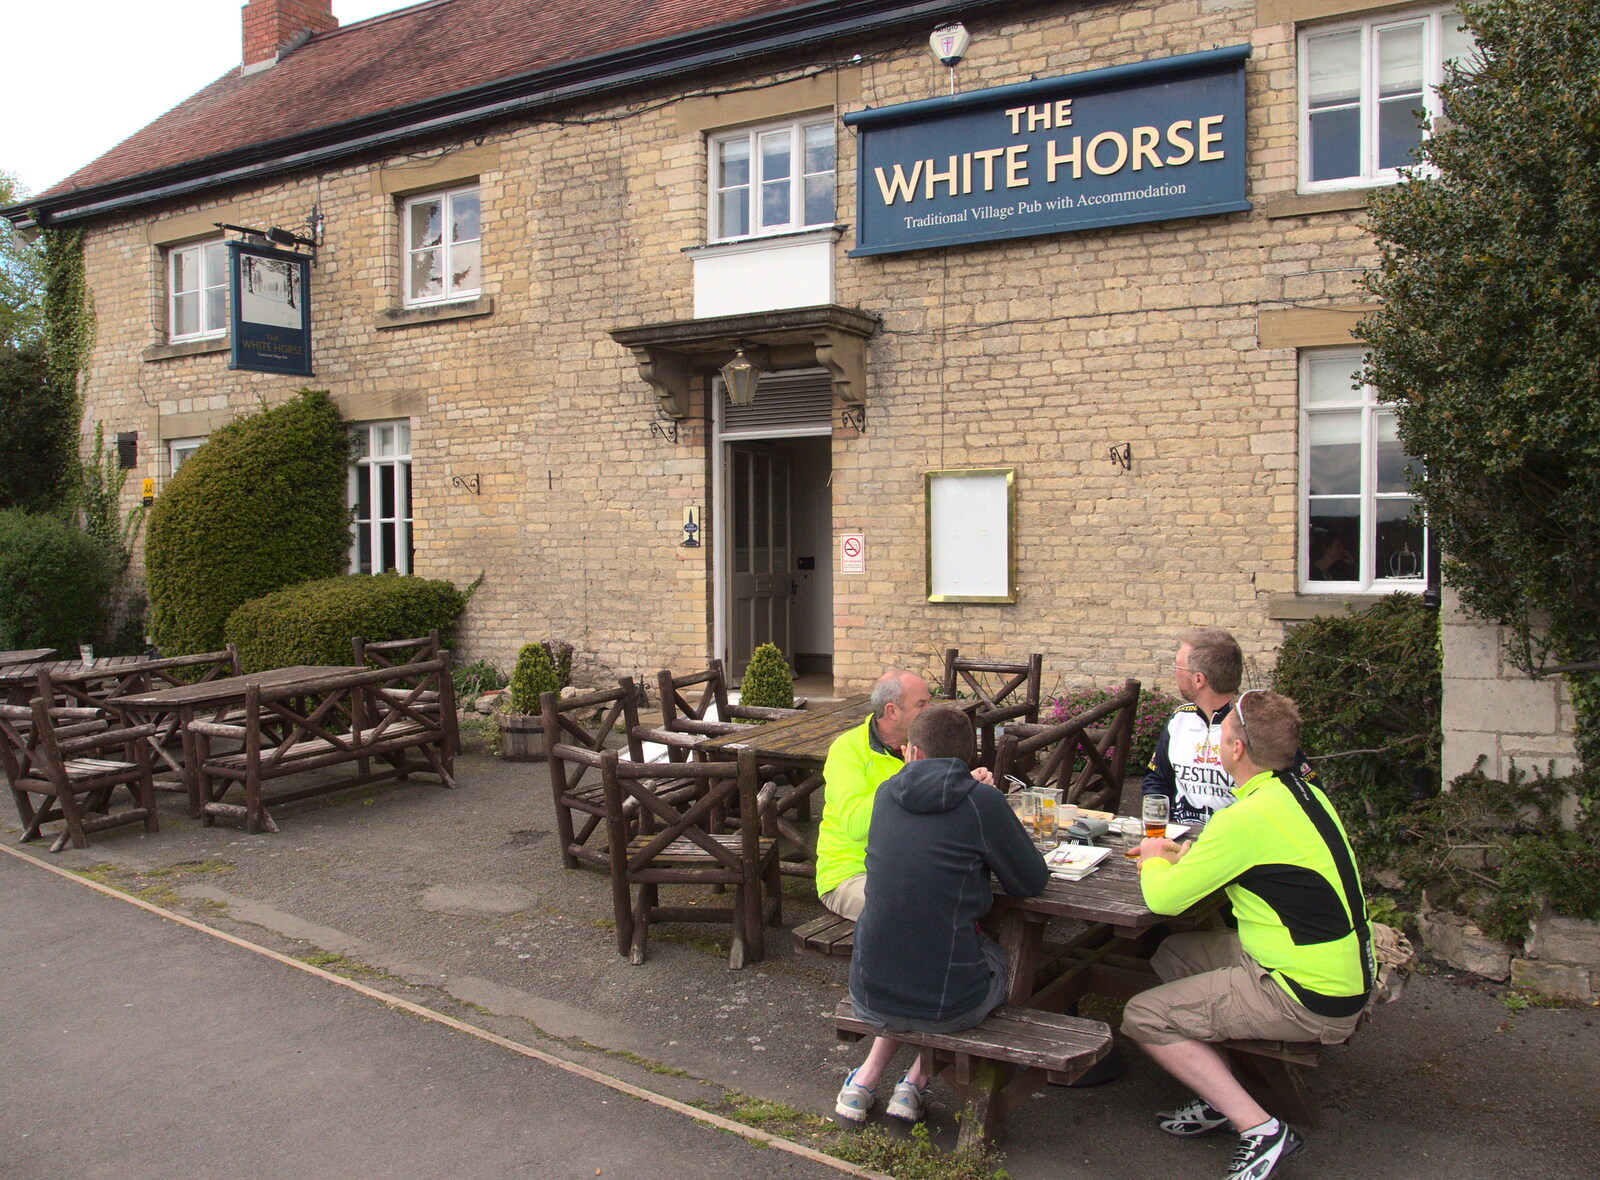 DH, Phil, Marc and Gaz sit outside in the cold from The BSCC Weekend Away, Lyddington, Rutland - 9th May 2015